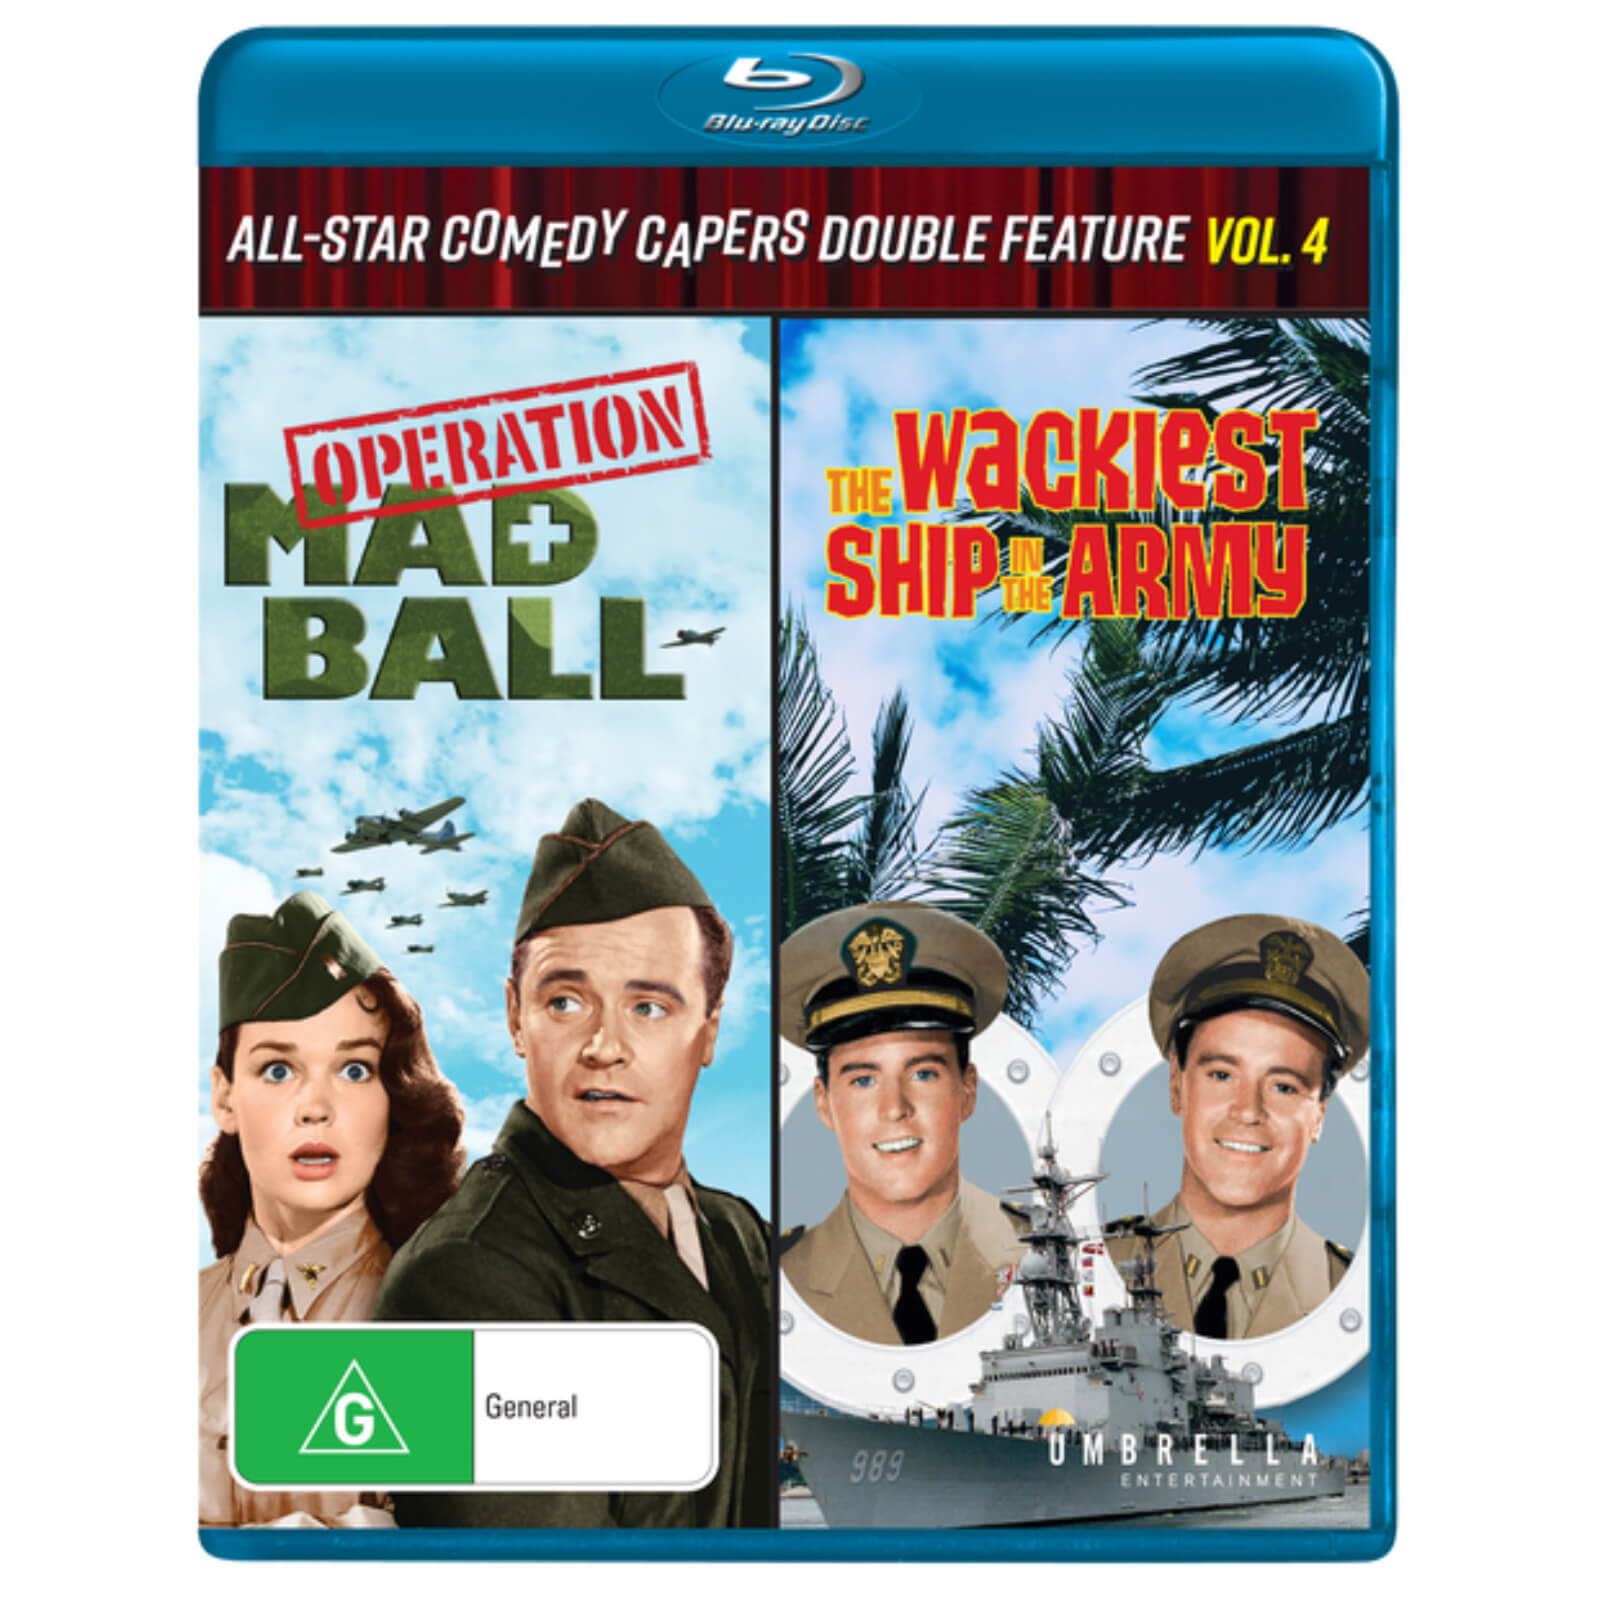 Operation Mad Ball / The Wackiest Ship In The Army (US Import) von Umbrella Entertainment